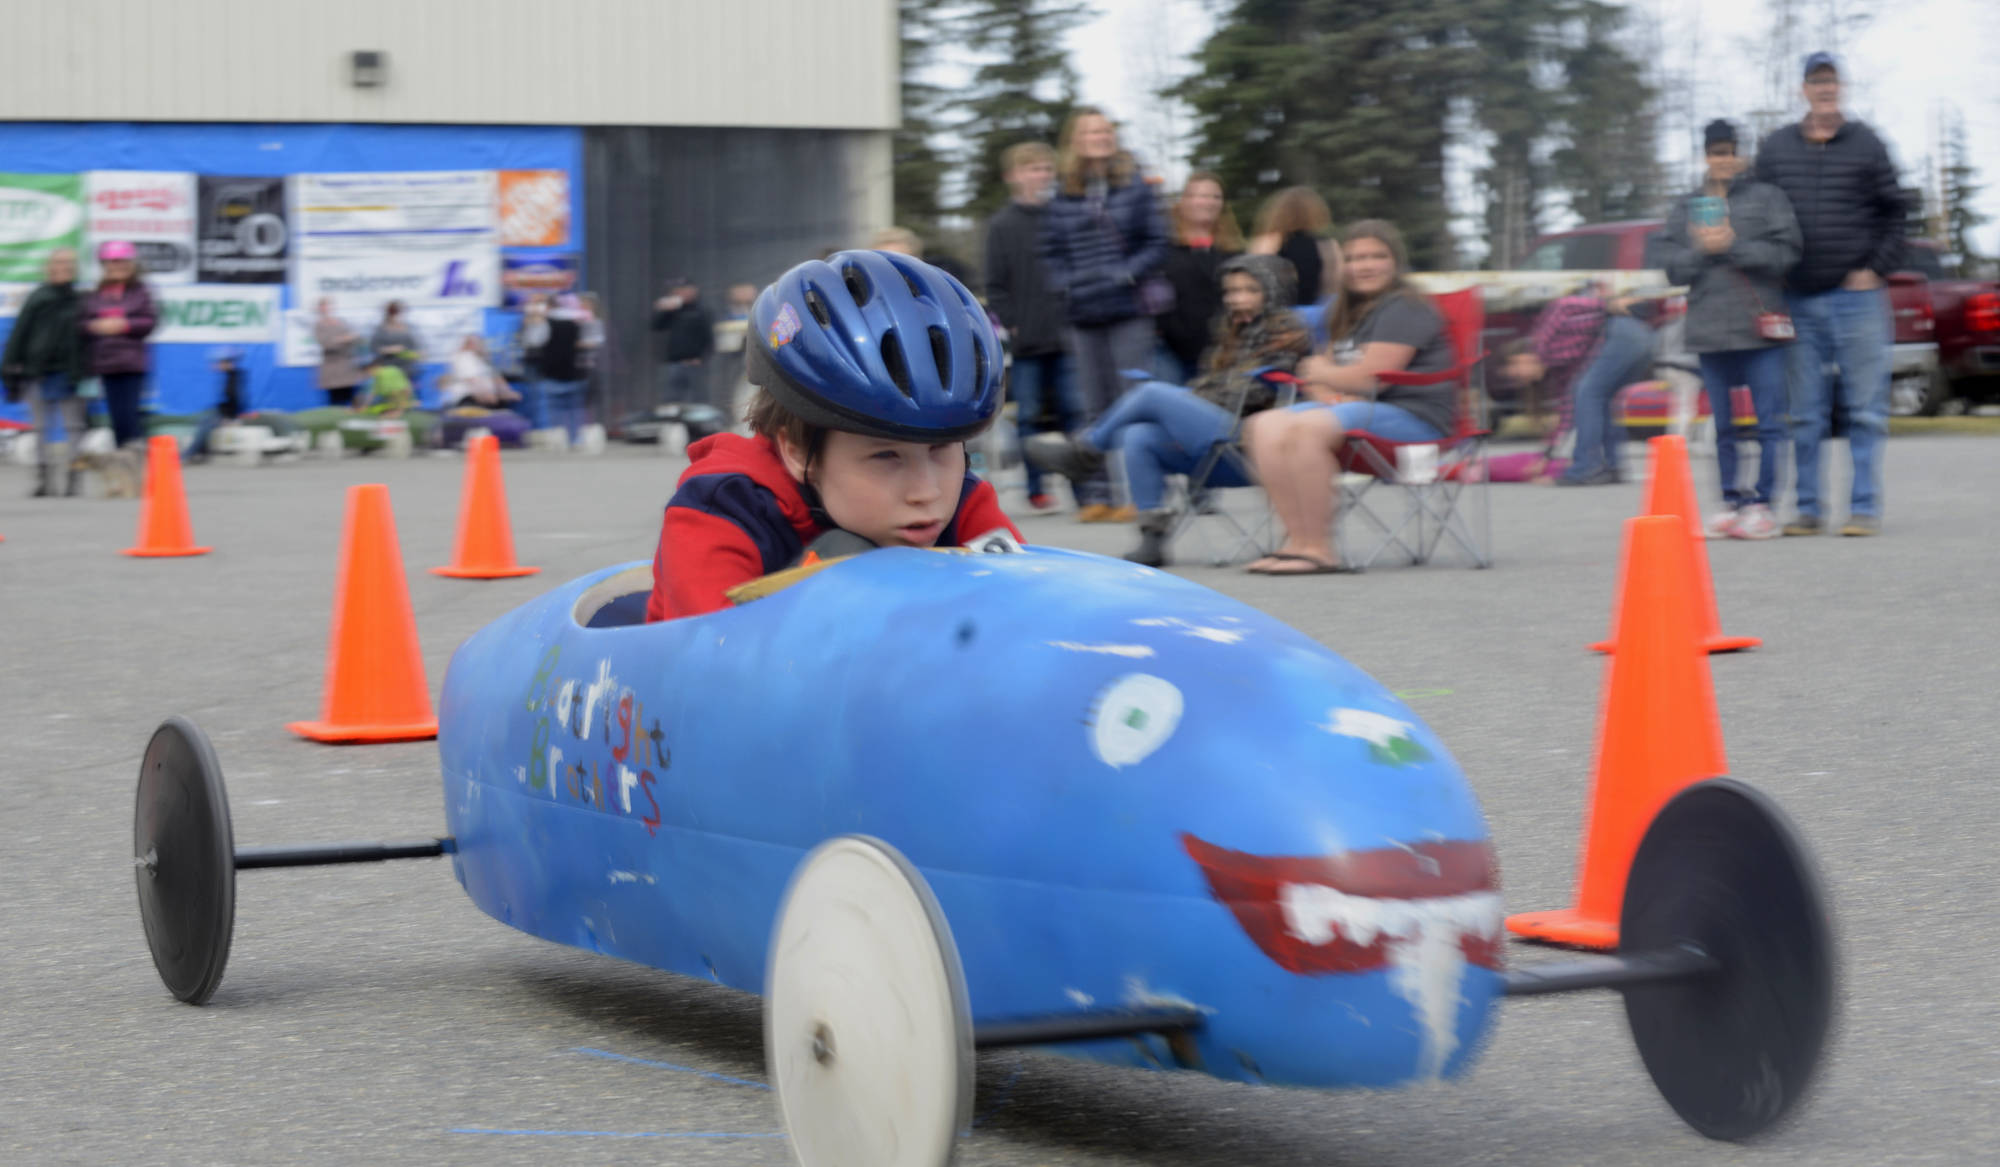 Nathanael Boatright races in the blue “Boatright Brothers” car during the Kenai Rotary Club’s 12th anual soapbox derby race on Saturday, May 12, 2018 at the Challenger Learning Center in Kenai Alaska. Since his family began racing in the derby over ten years ago, their blue car has been ridden by Nathanael’s four brothers and his sister. Nathanael placed second in Saturday’s race, beneath Maccoy Castillo, who qualified for the national All-American Soap Box Derby World Championship in Akron, Ohio. (Ben Boettger/Peninsula Clarion).